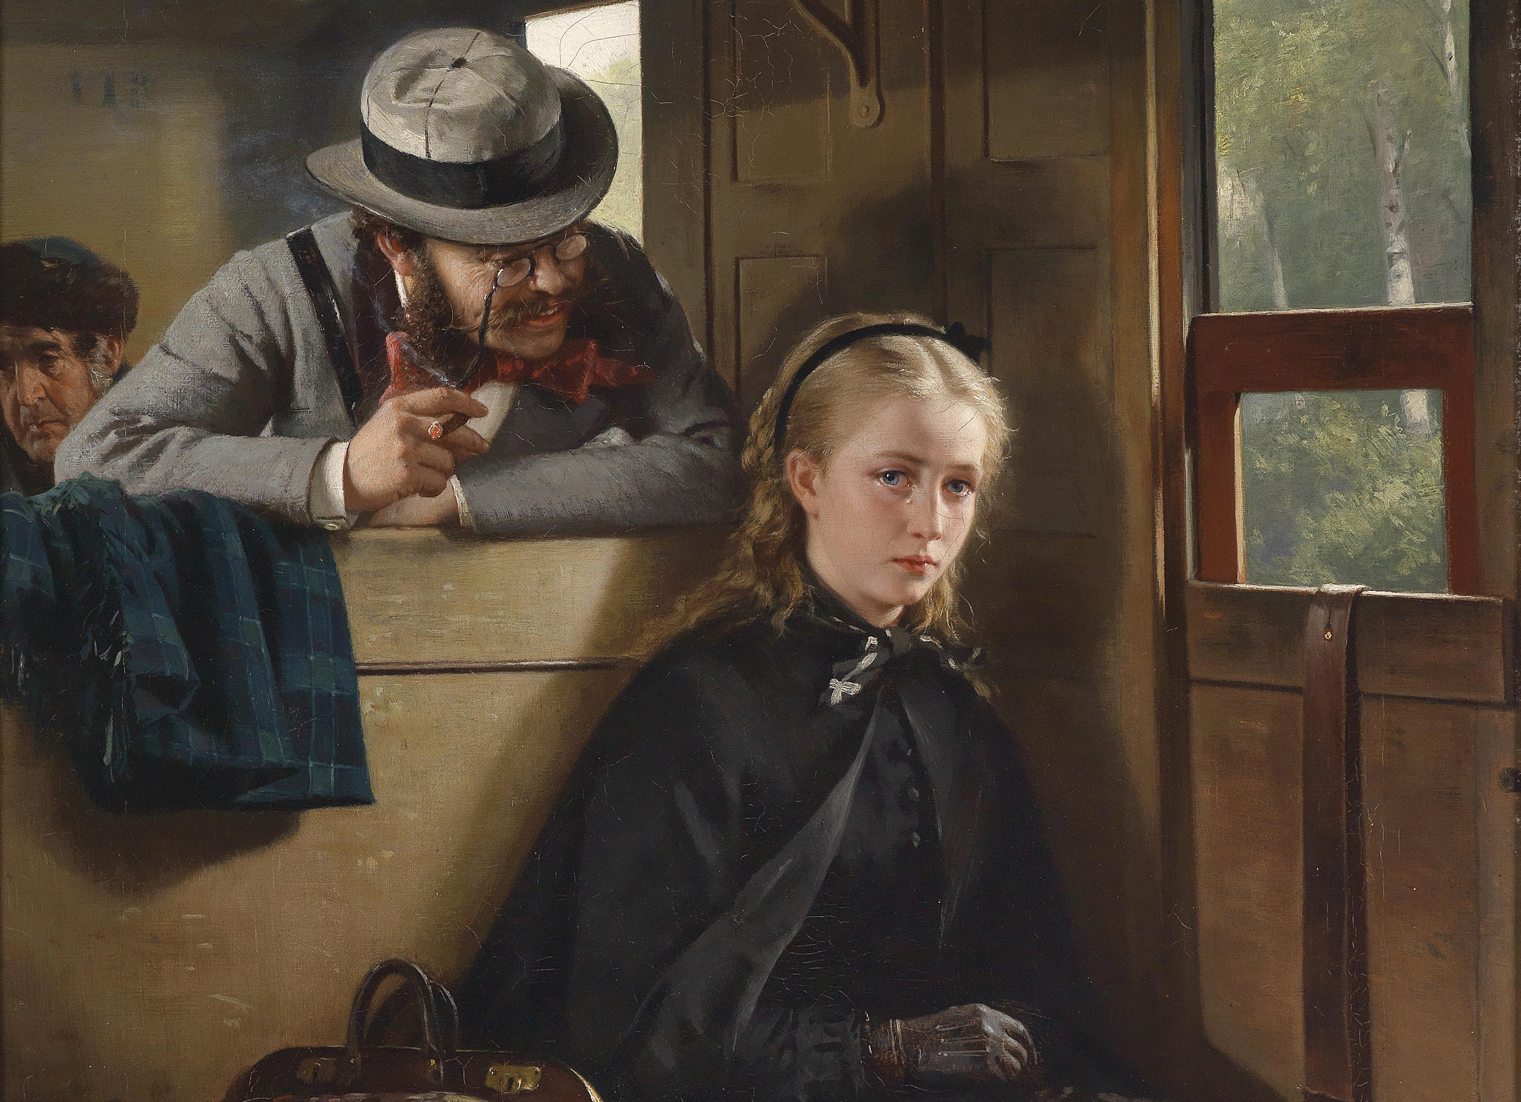 The Irritating Gentleman by Berthold Woltze. A painting of an annoying man leaning over a train seat to badger a woman minding her own business. 